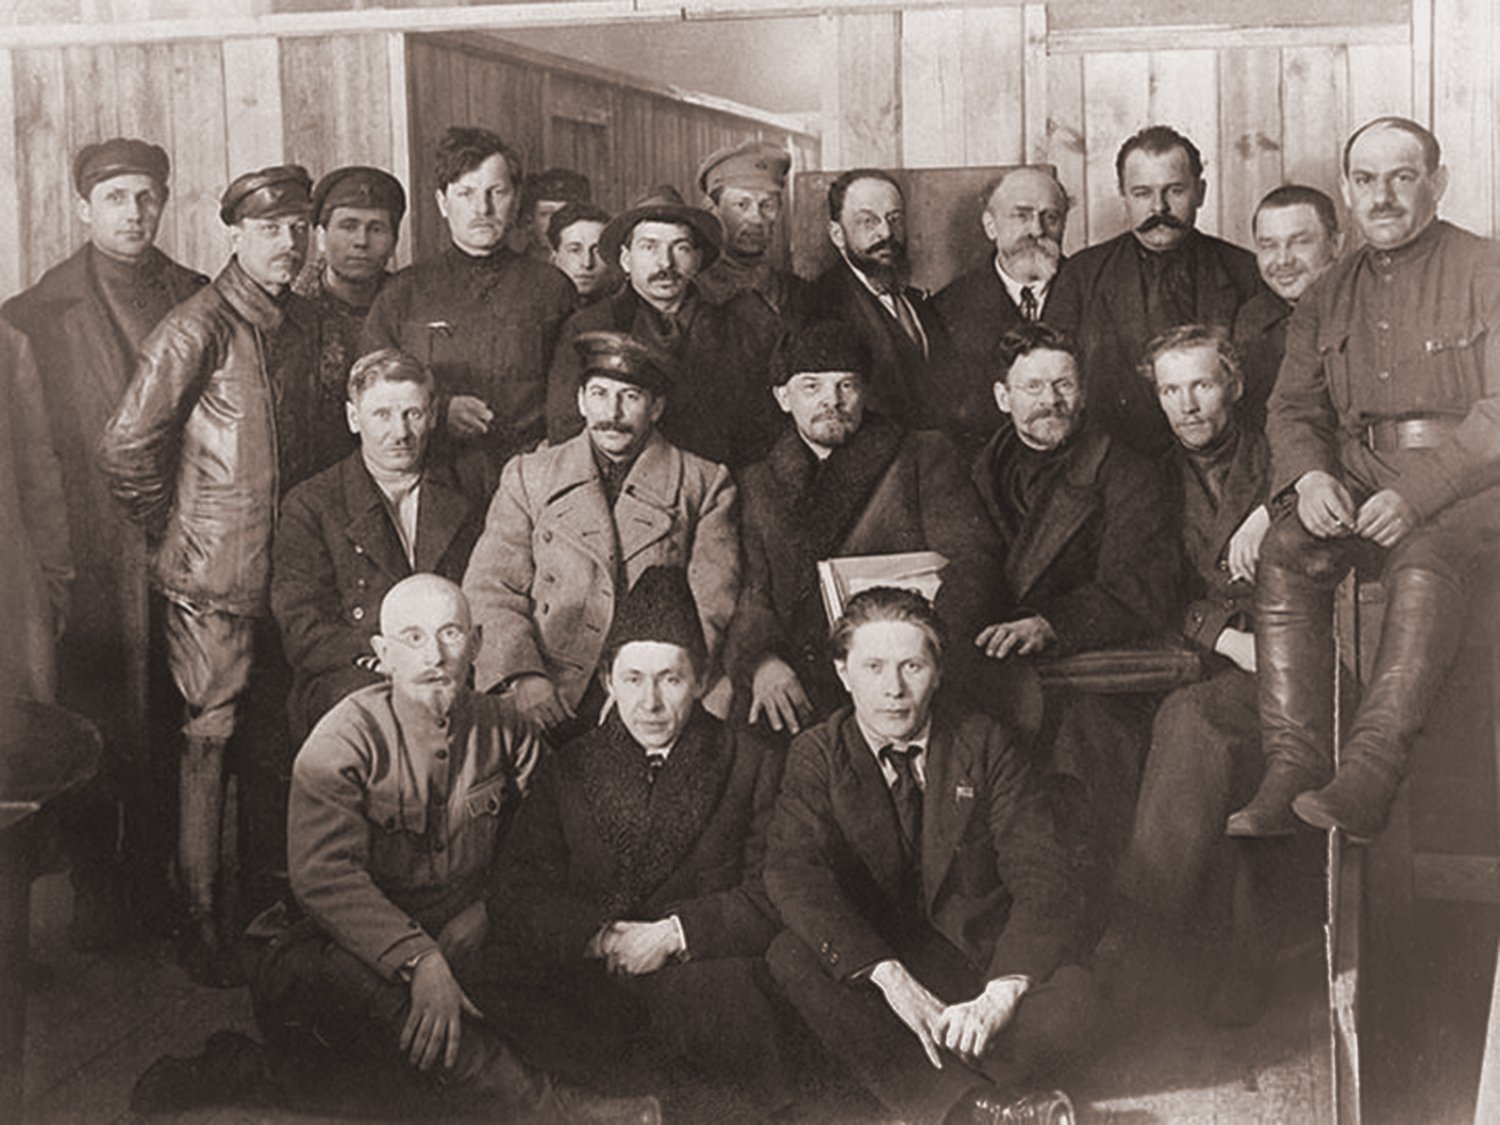 Sepia-toned photograph of participants at the 8th Congress of the Russian Communist Party in 1919. The group is assembled in a wooden room. Central figures include Stalin, Vladimir Lenin, and Mikhail Kalinin, surrounded by other delegates dressed in a mix of military and civilian attire.